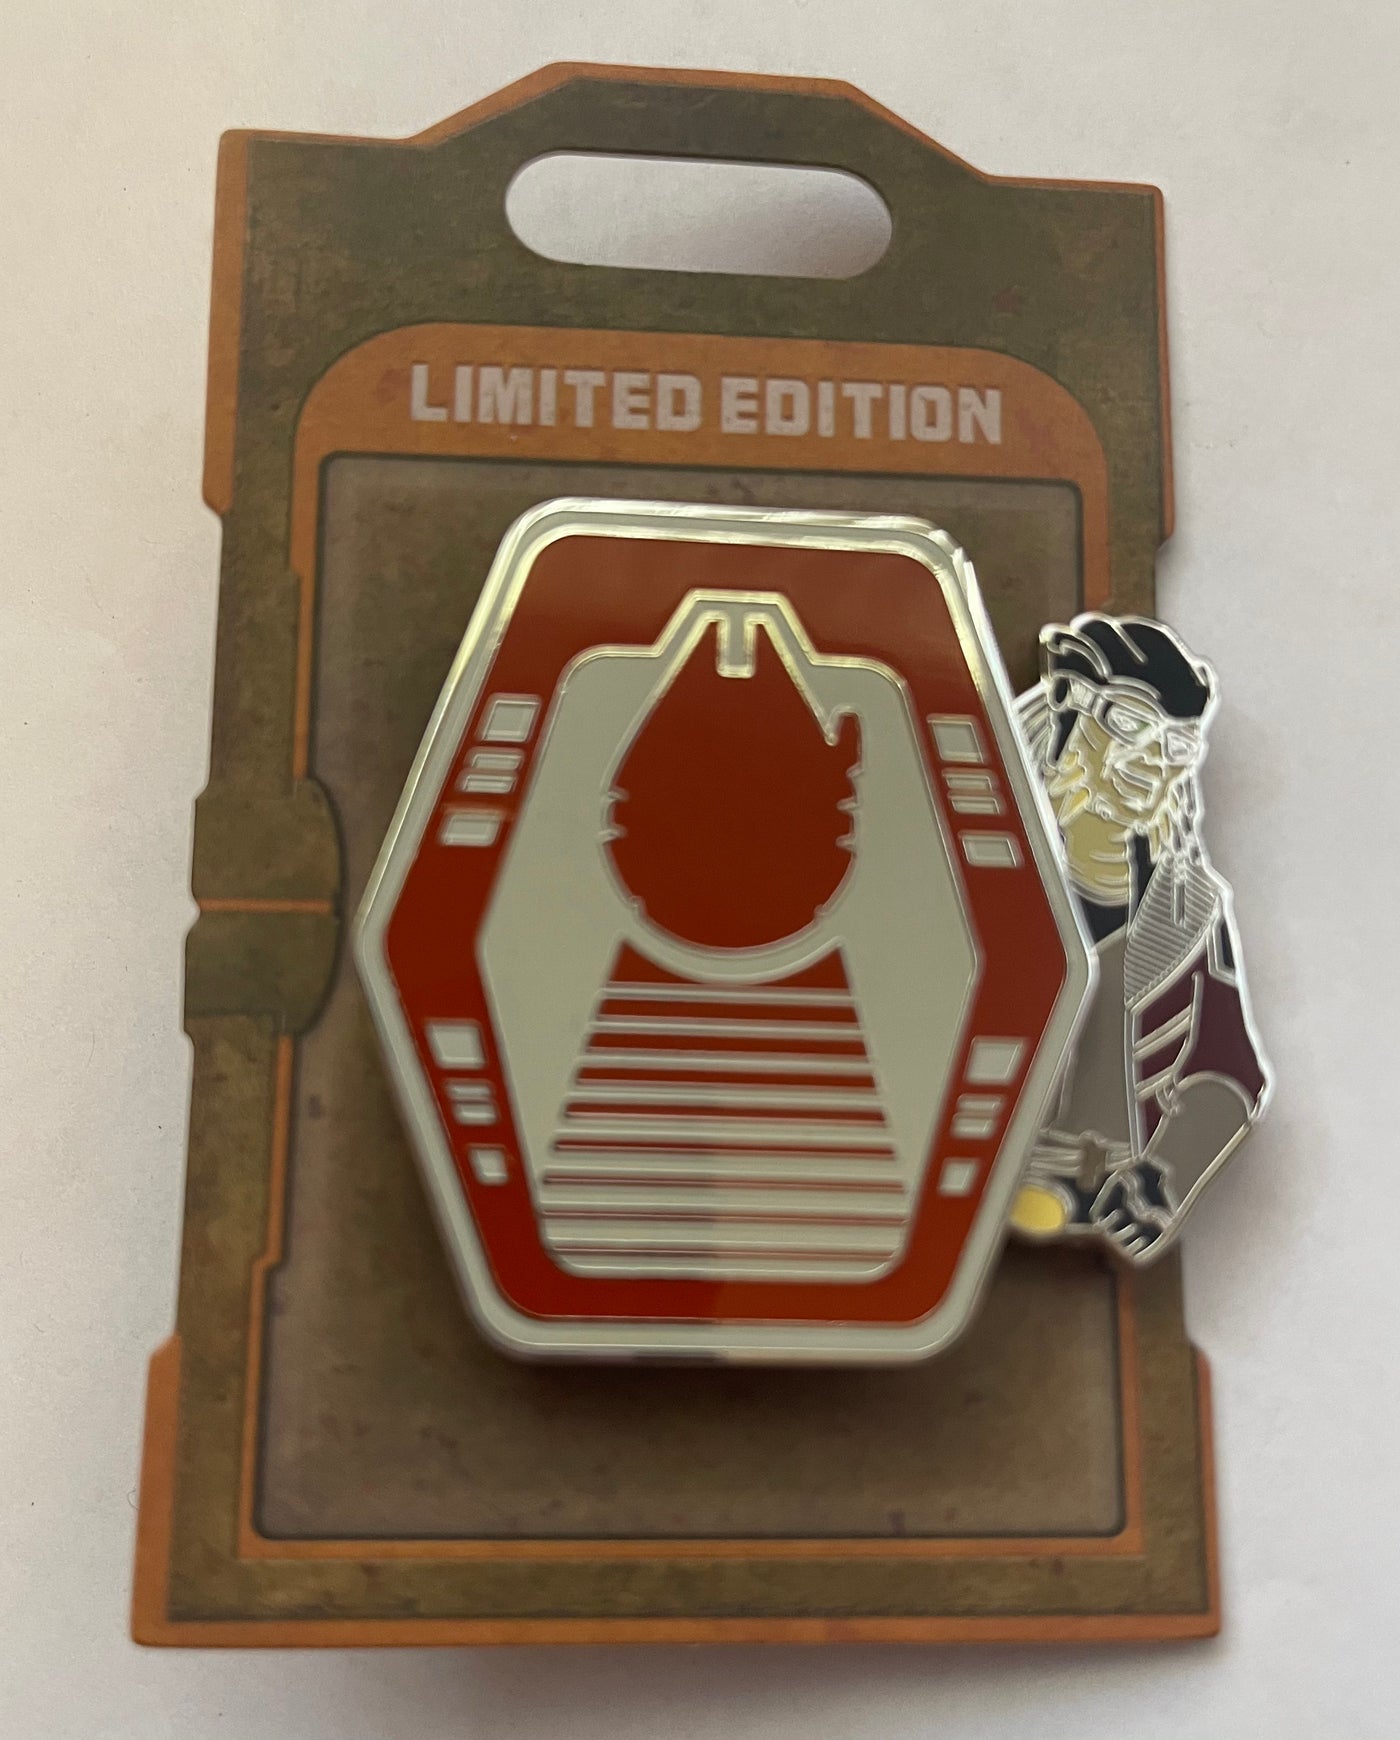 Disney Star Wars Day May the 4th Be With You 2021 Limited Edition Hondo Pin